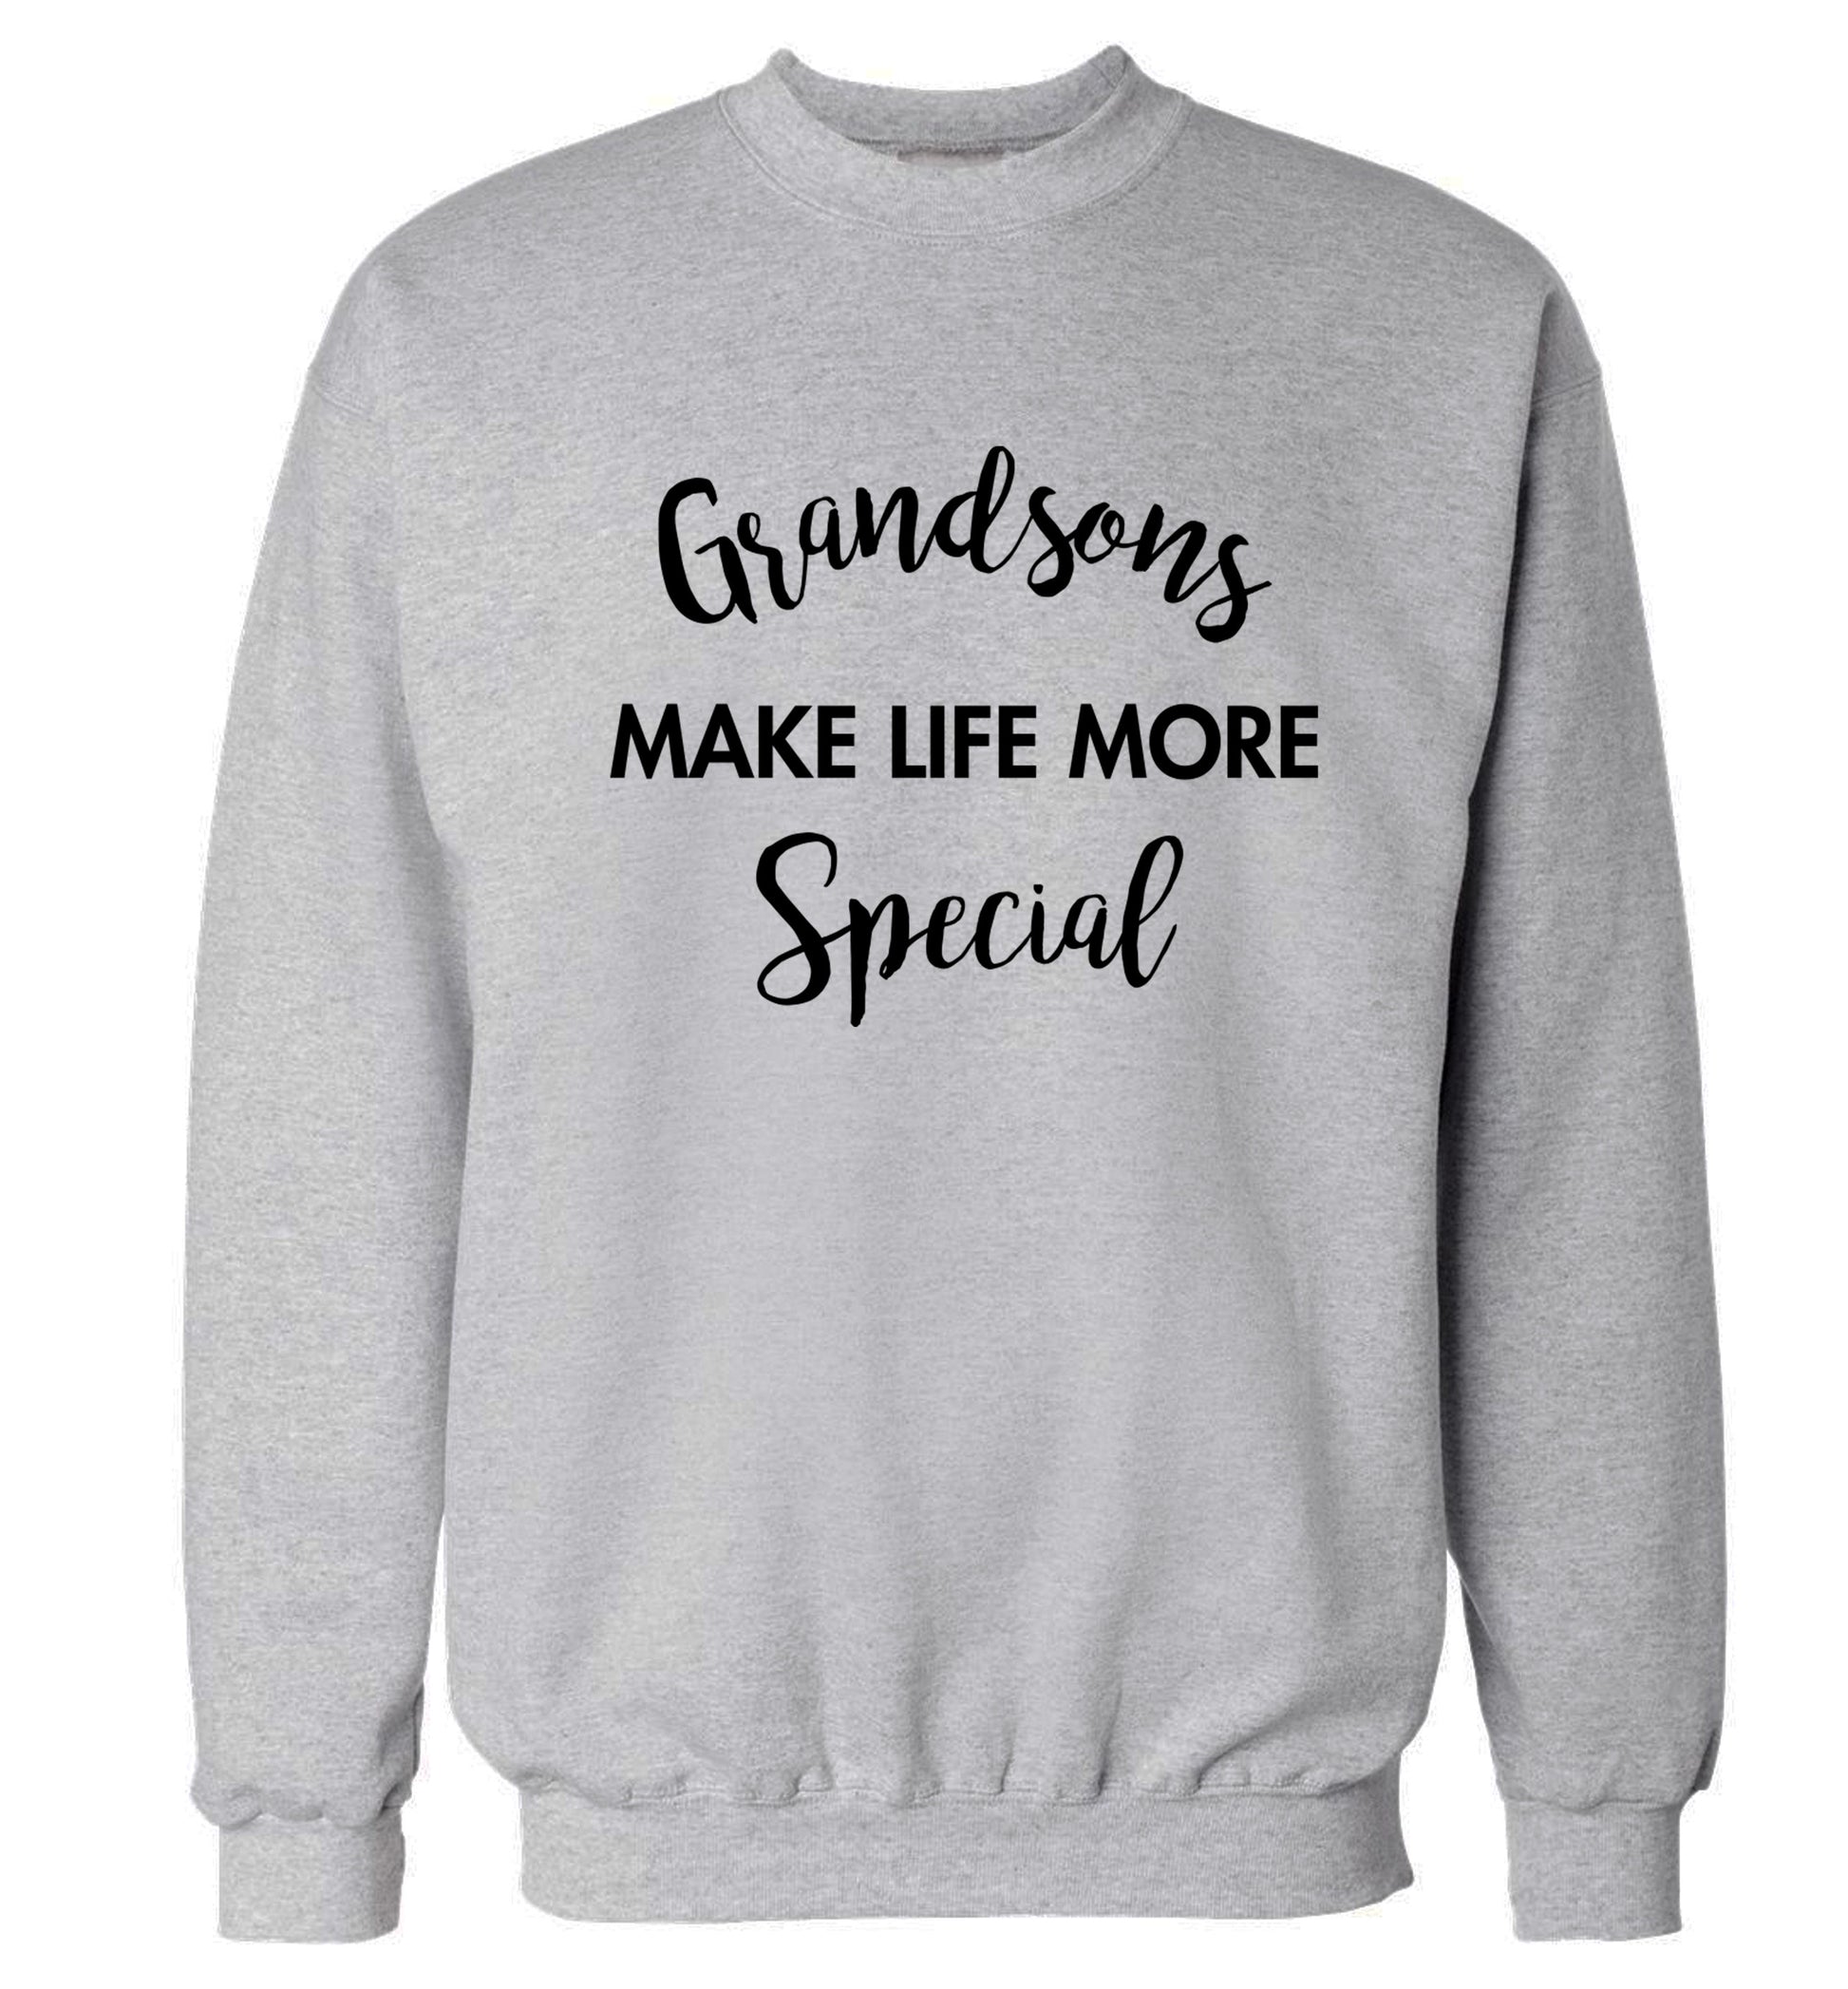 Grandsons make life more special Adult's unisex grey Sweater 2XL